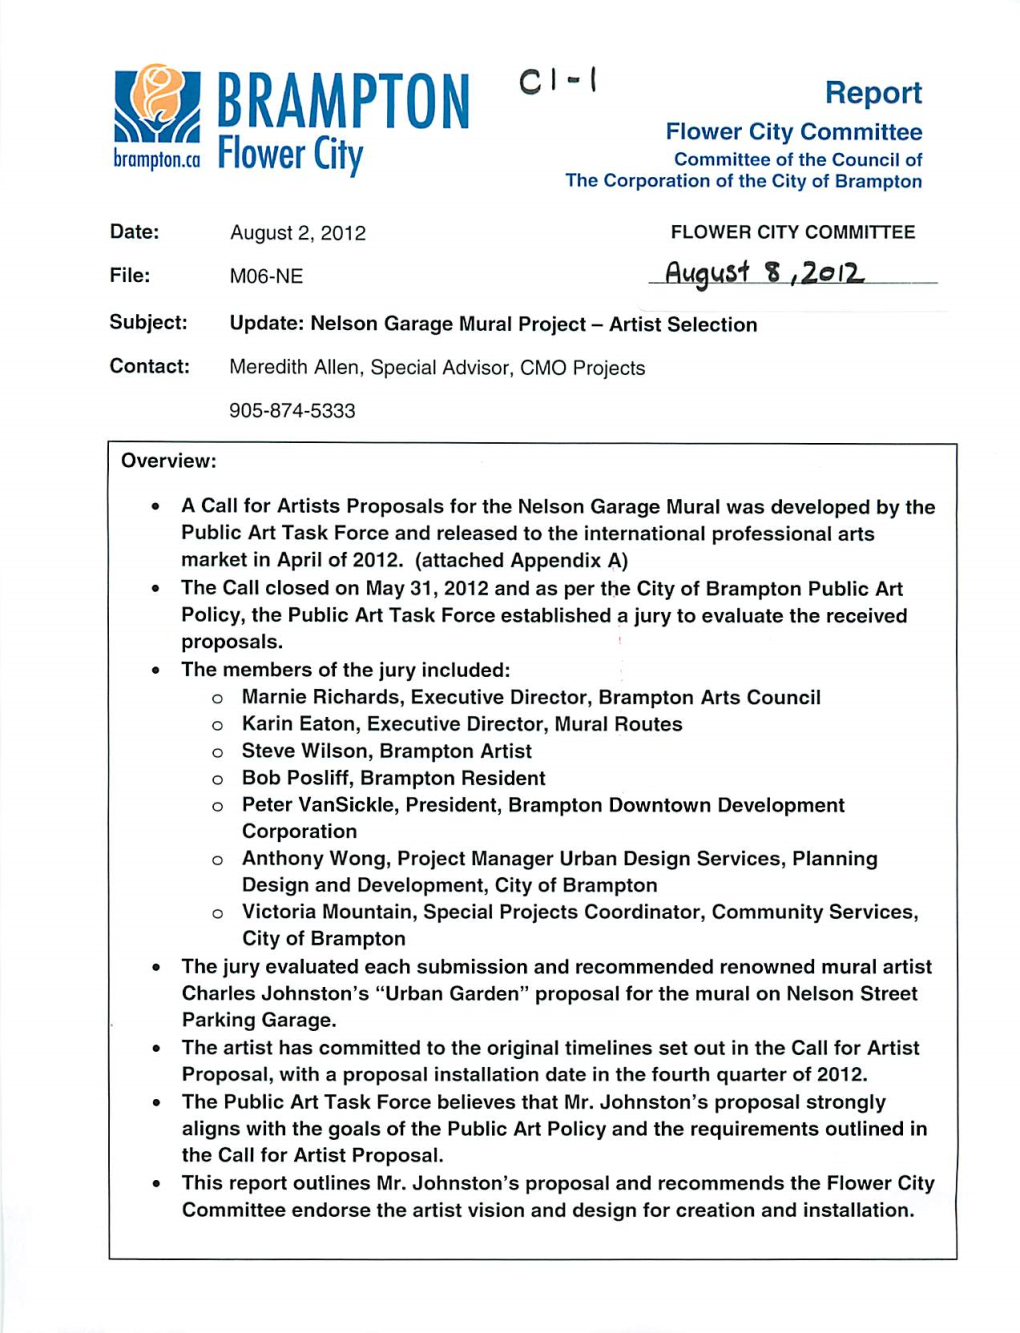 Flower City Committee Item C1 for August 8, 2012